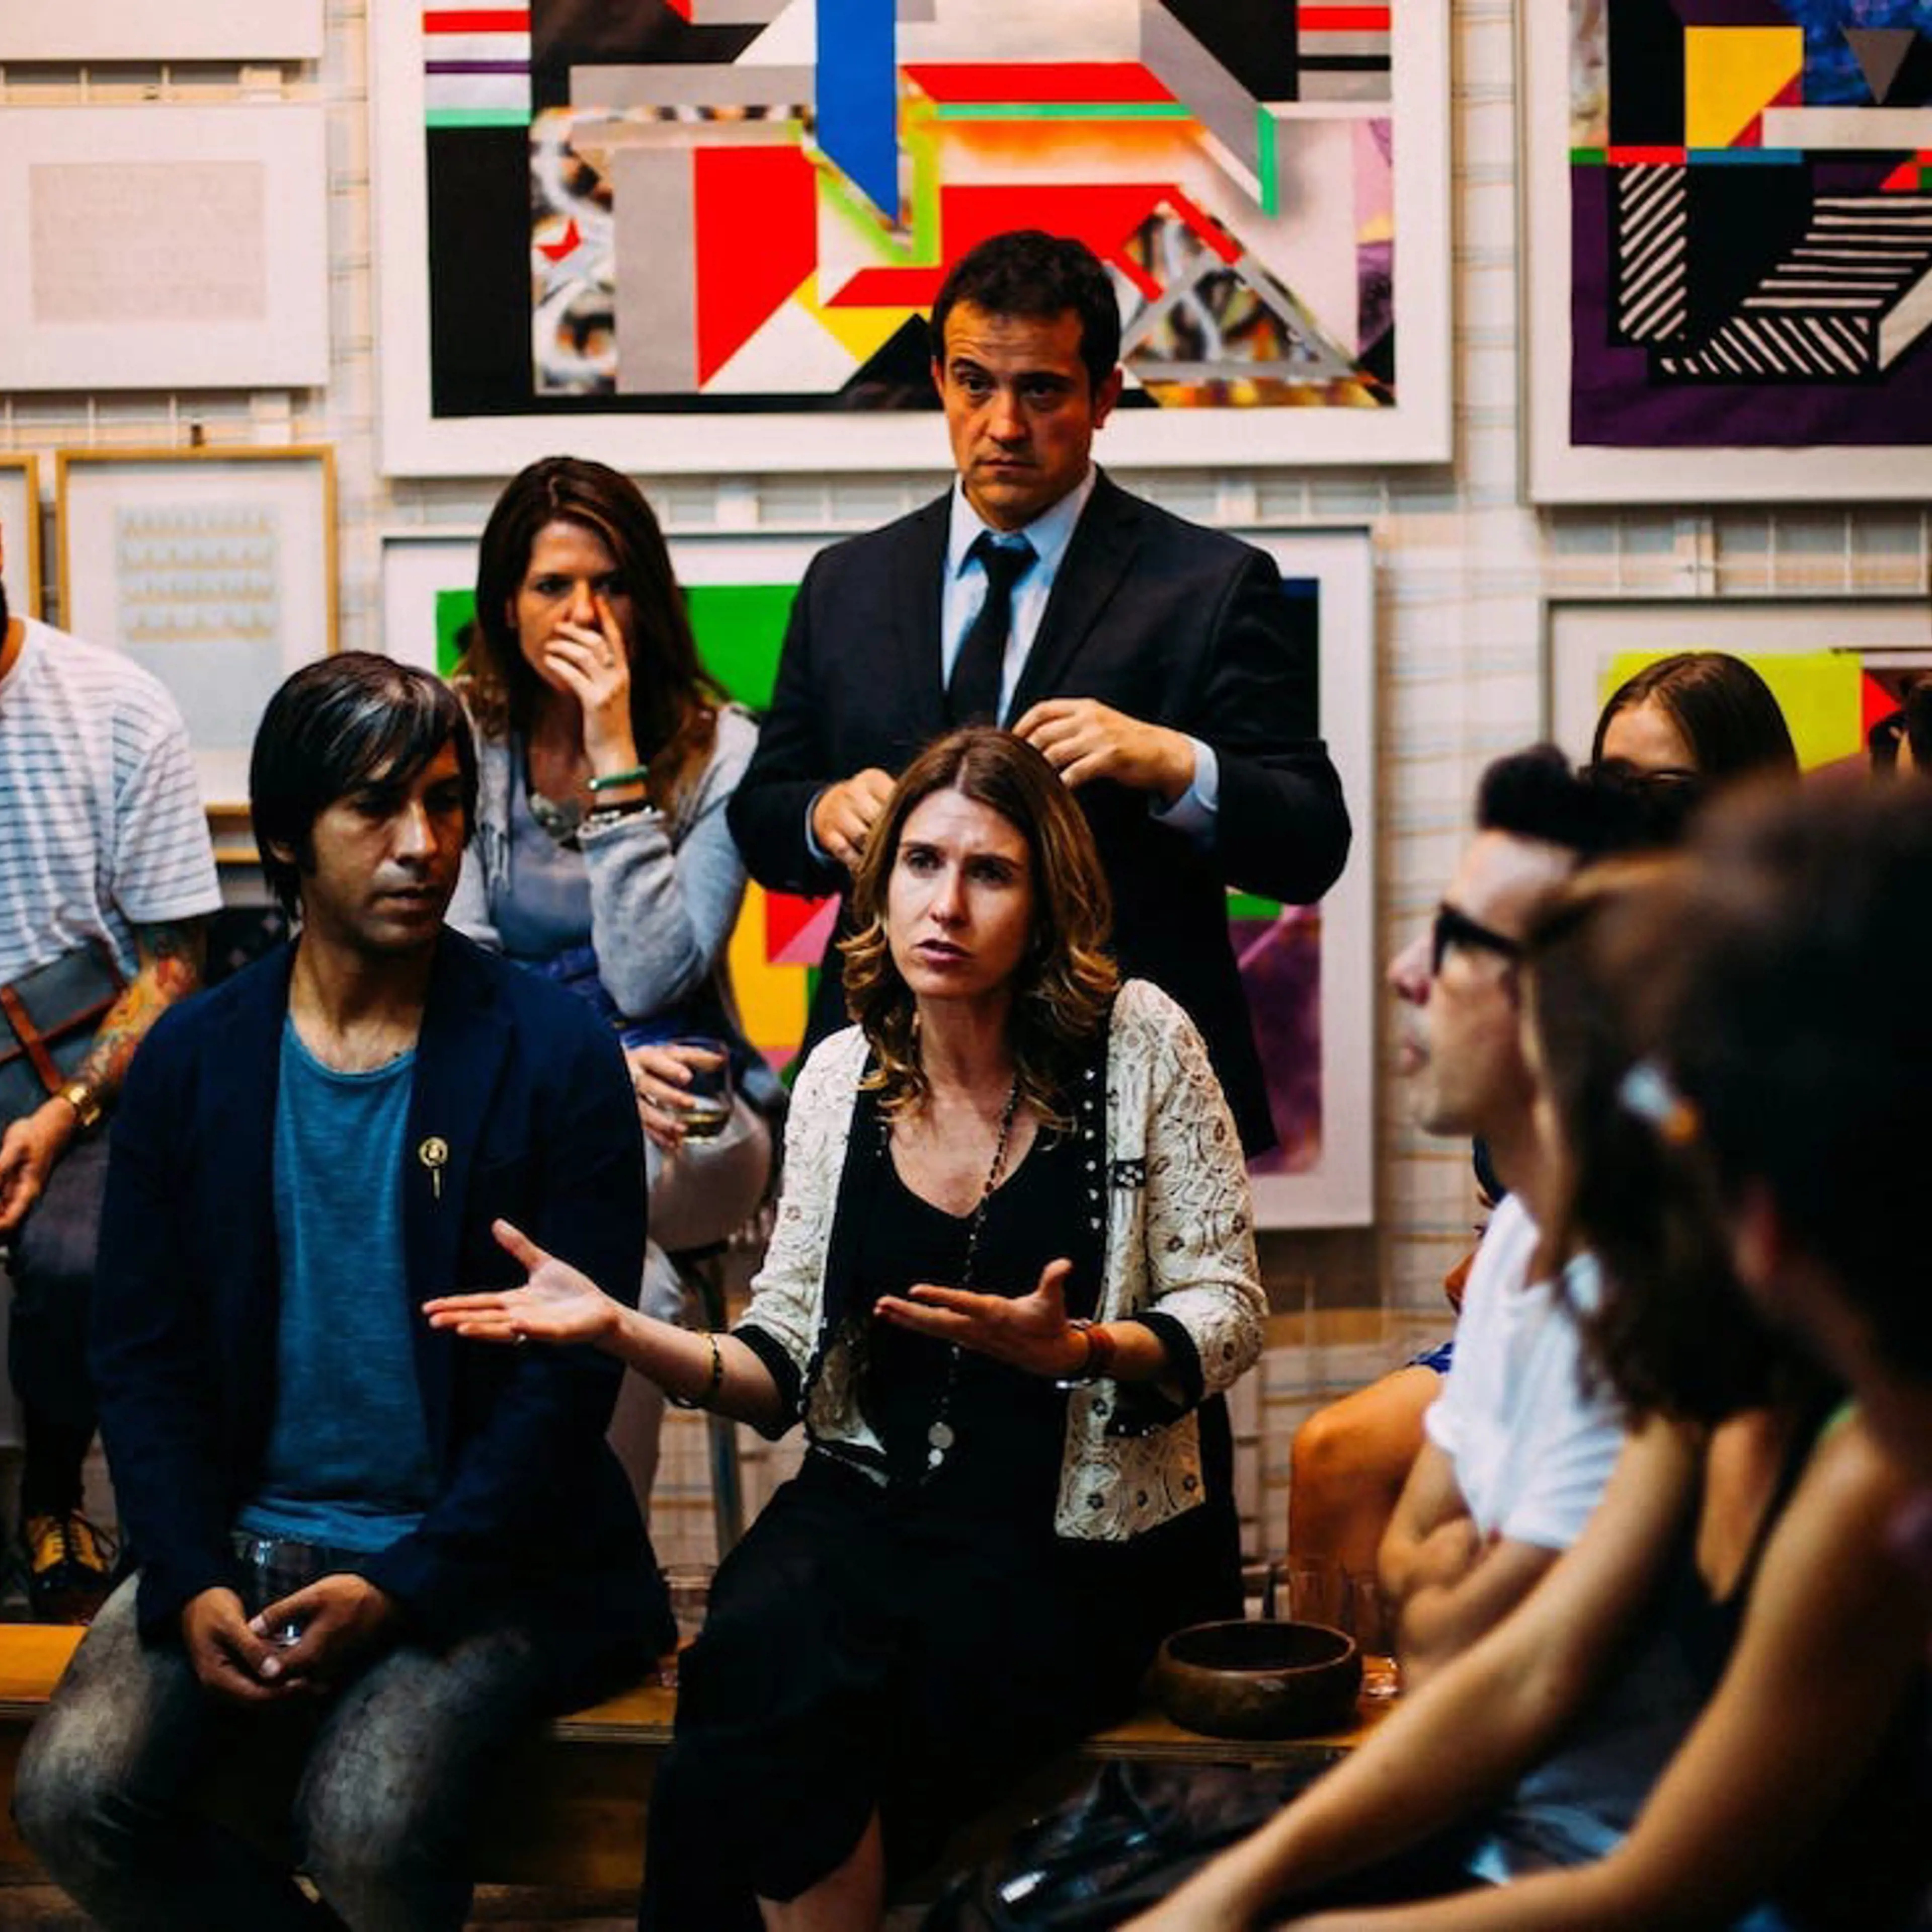 A lady talking among a group of people, some sitting, some standing, with art prints hanging on the background walls 